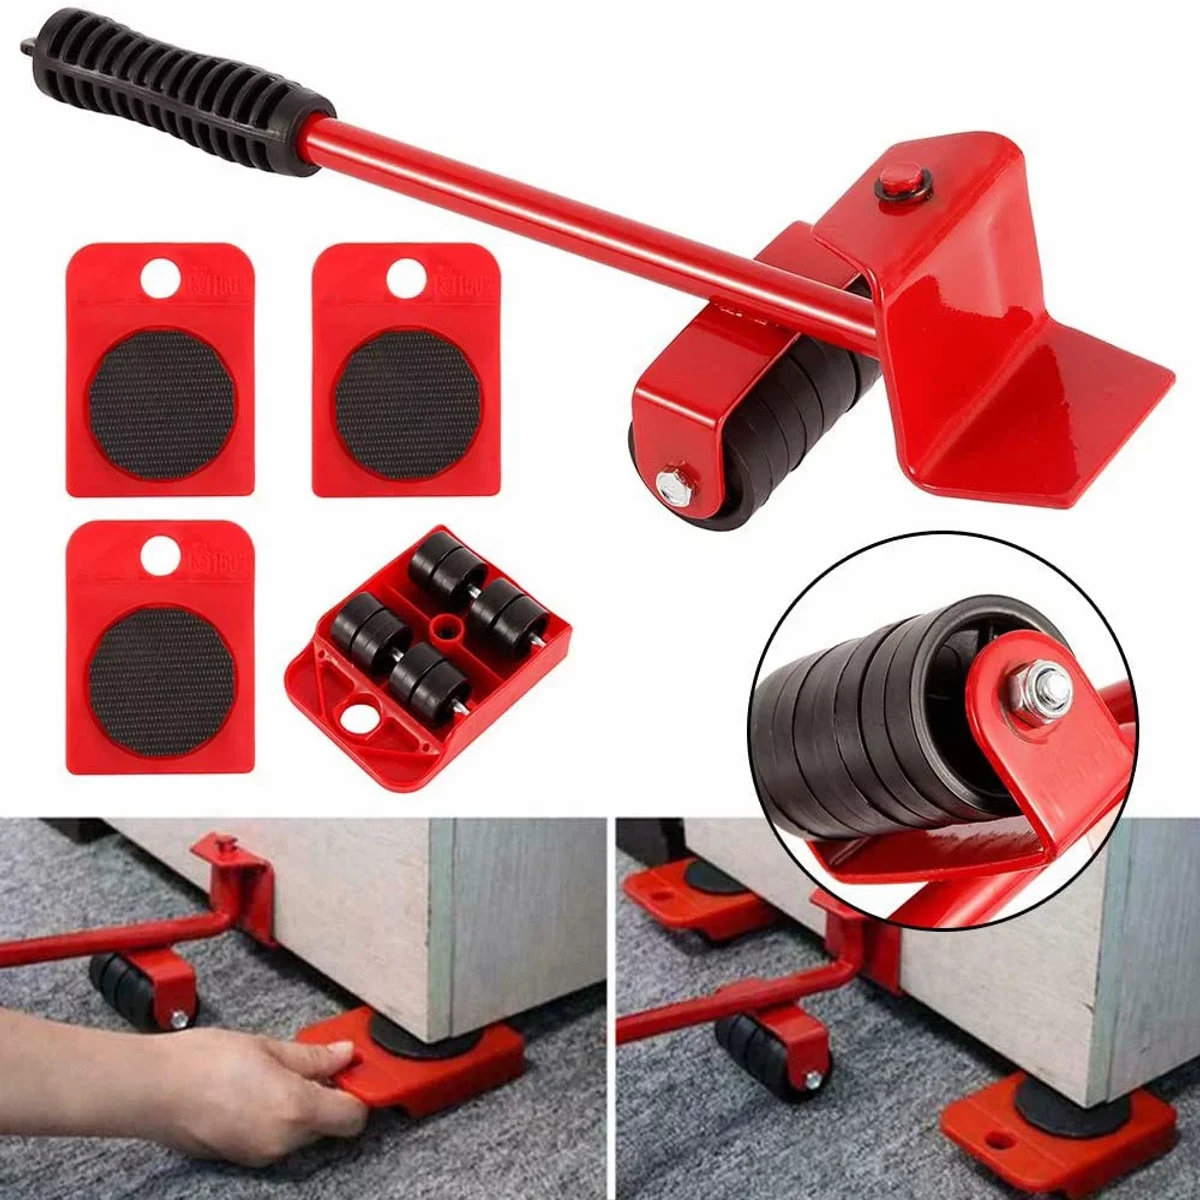 Furniture Easy Moving Tools, Furniture Moving Tool Heavy Object Mover Furniture Transport Lifter & Furniture Slides 4 Wheeled Mover Roller+ 1 Wheel Bar Hand Tools Set, Furniture Lifter Mover Tool Set Furniture Lifting Wheels (5PCS)